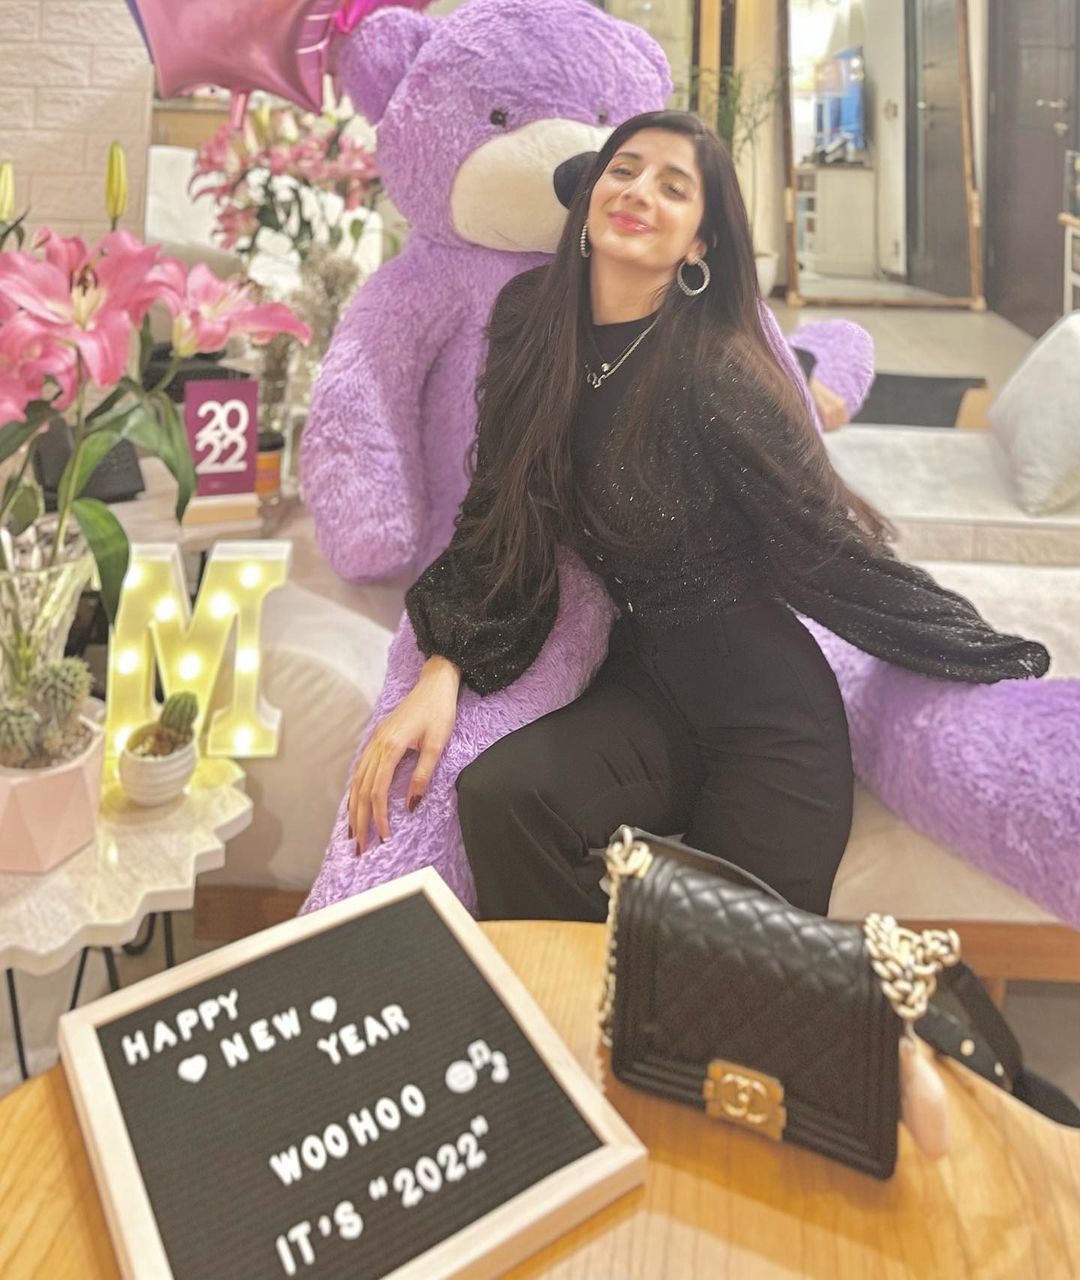 Mawra Hocane wishes Happy New Year to her fans